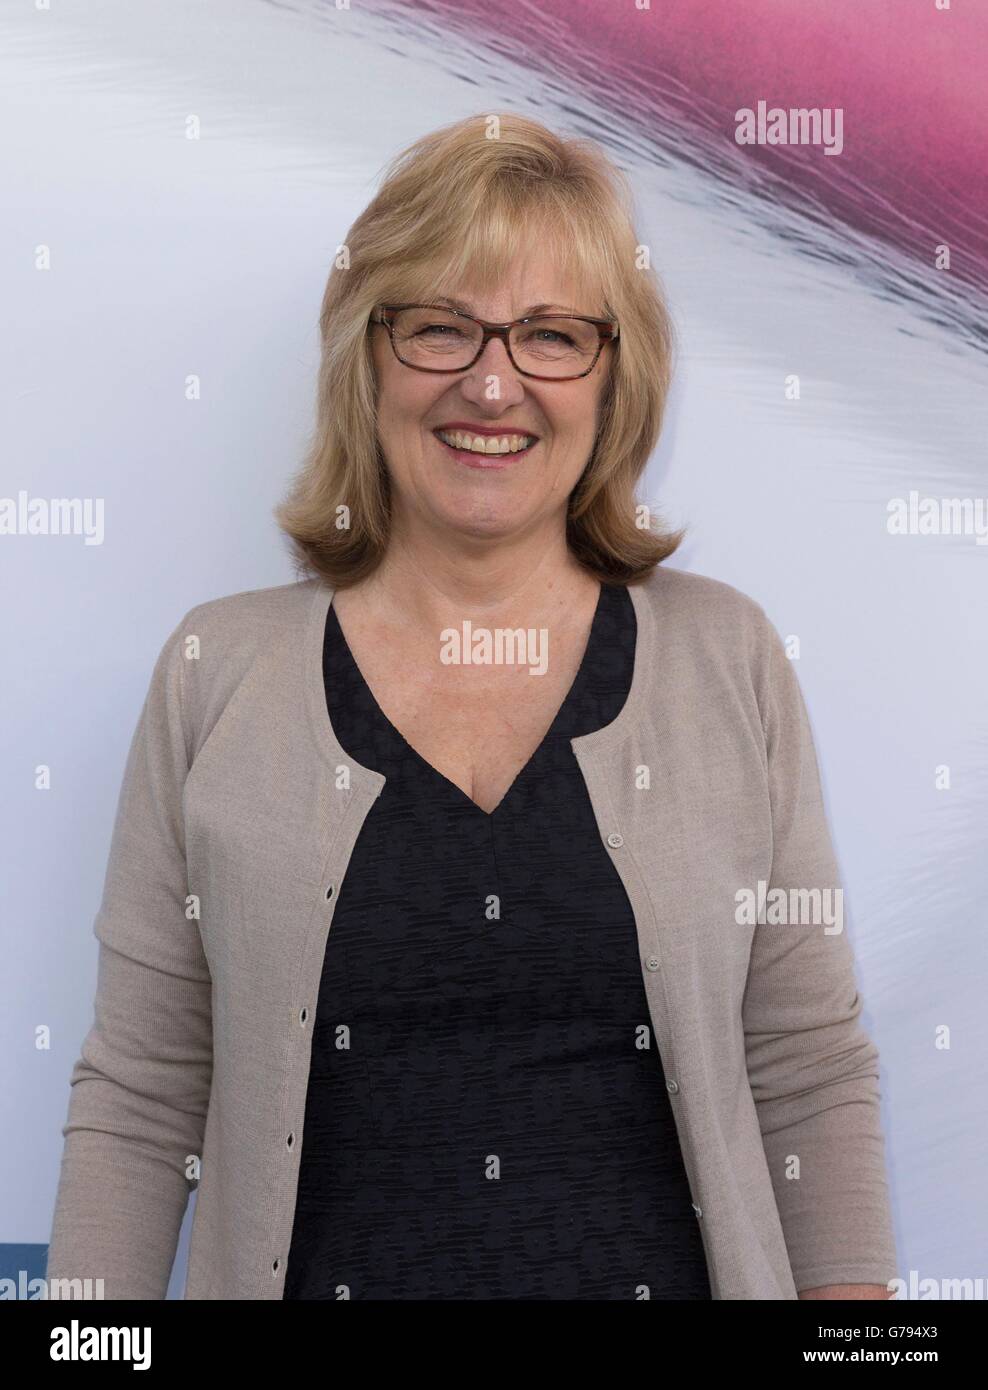 New York, NY, USA. 25th June, 2016. Janet Healy at arrivals for THE SECRET LIFE OF PETS Premiere, David H. Koch Theater at Lincoln Center, New York, NY June 25, 2016. Credit:  Lev Radin/Everett Collection/Alamy Live News Stock Photo